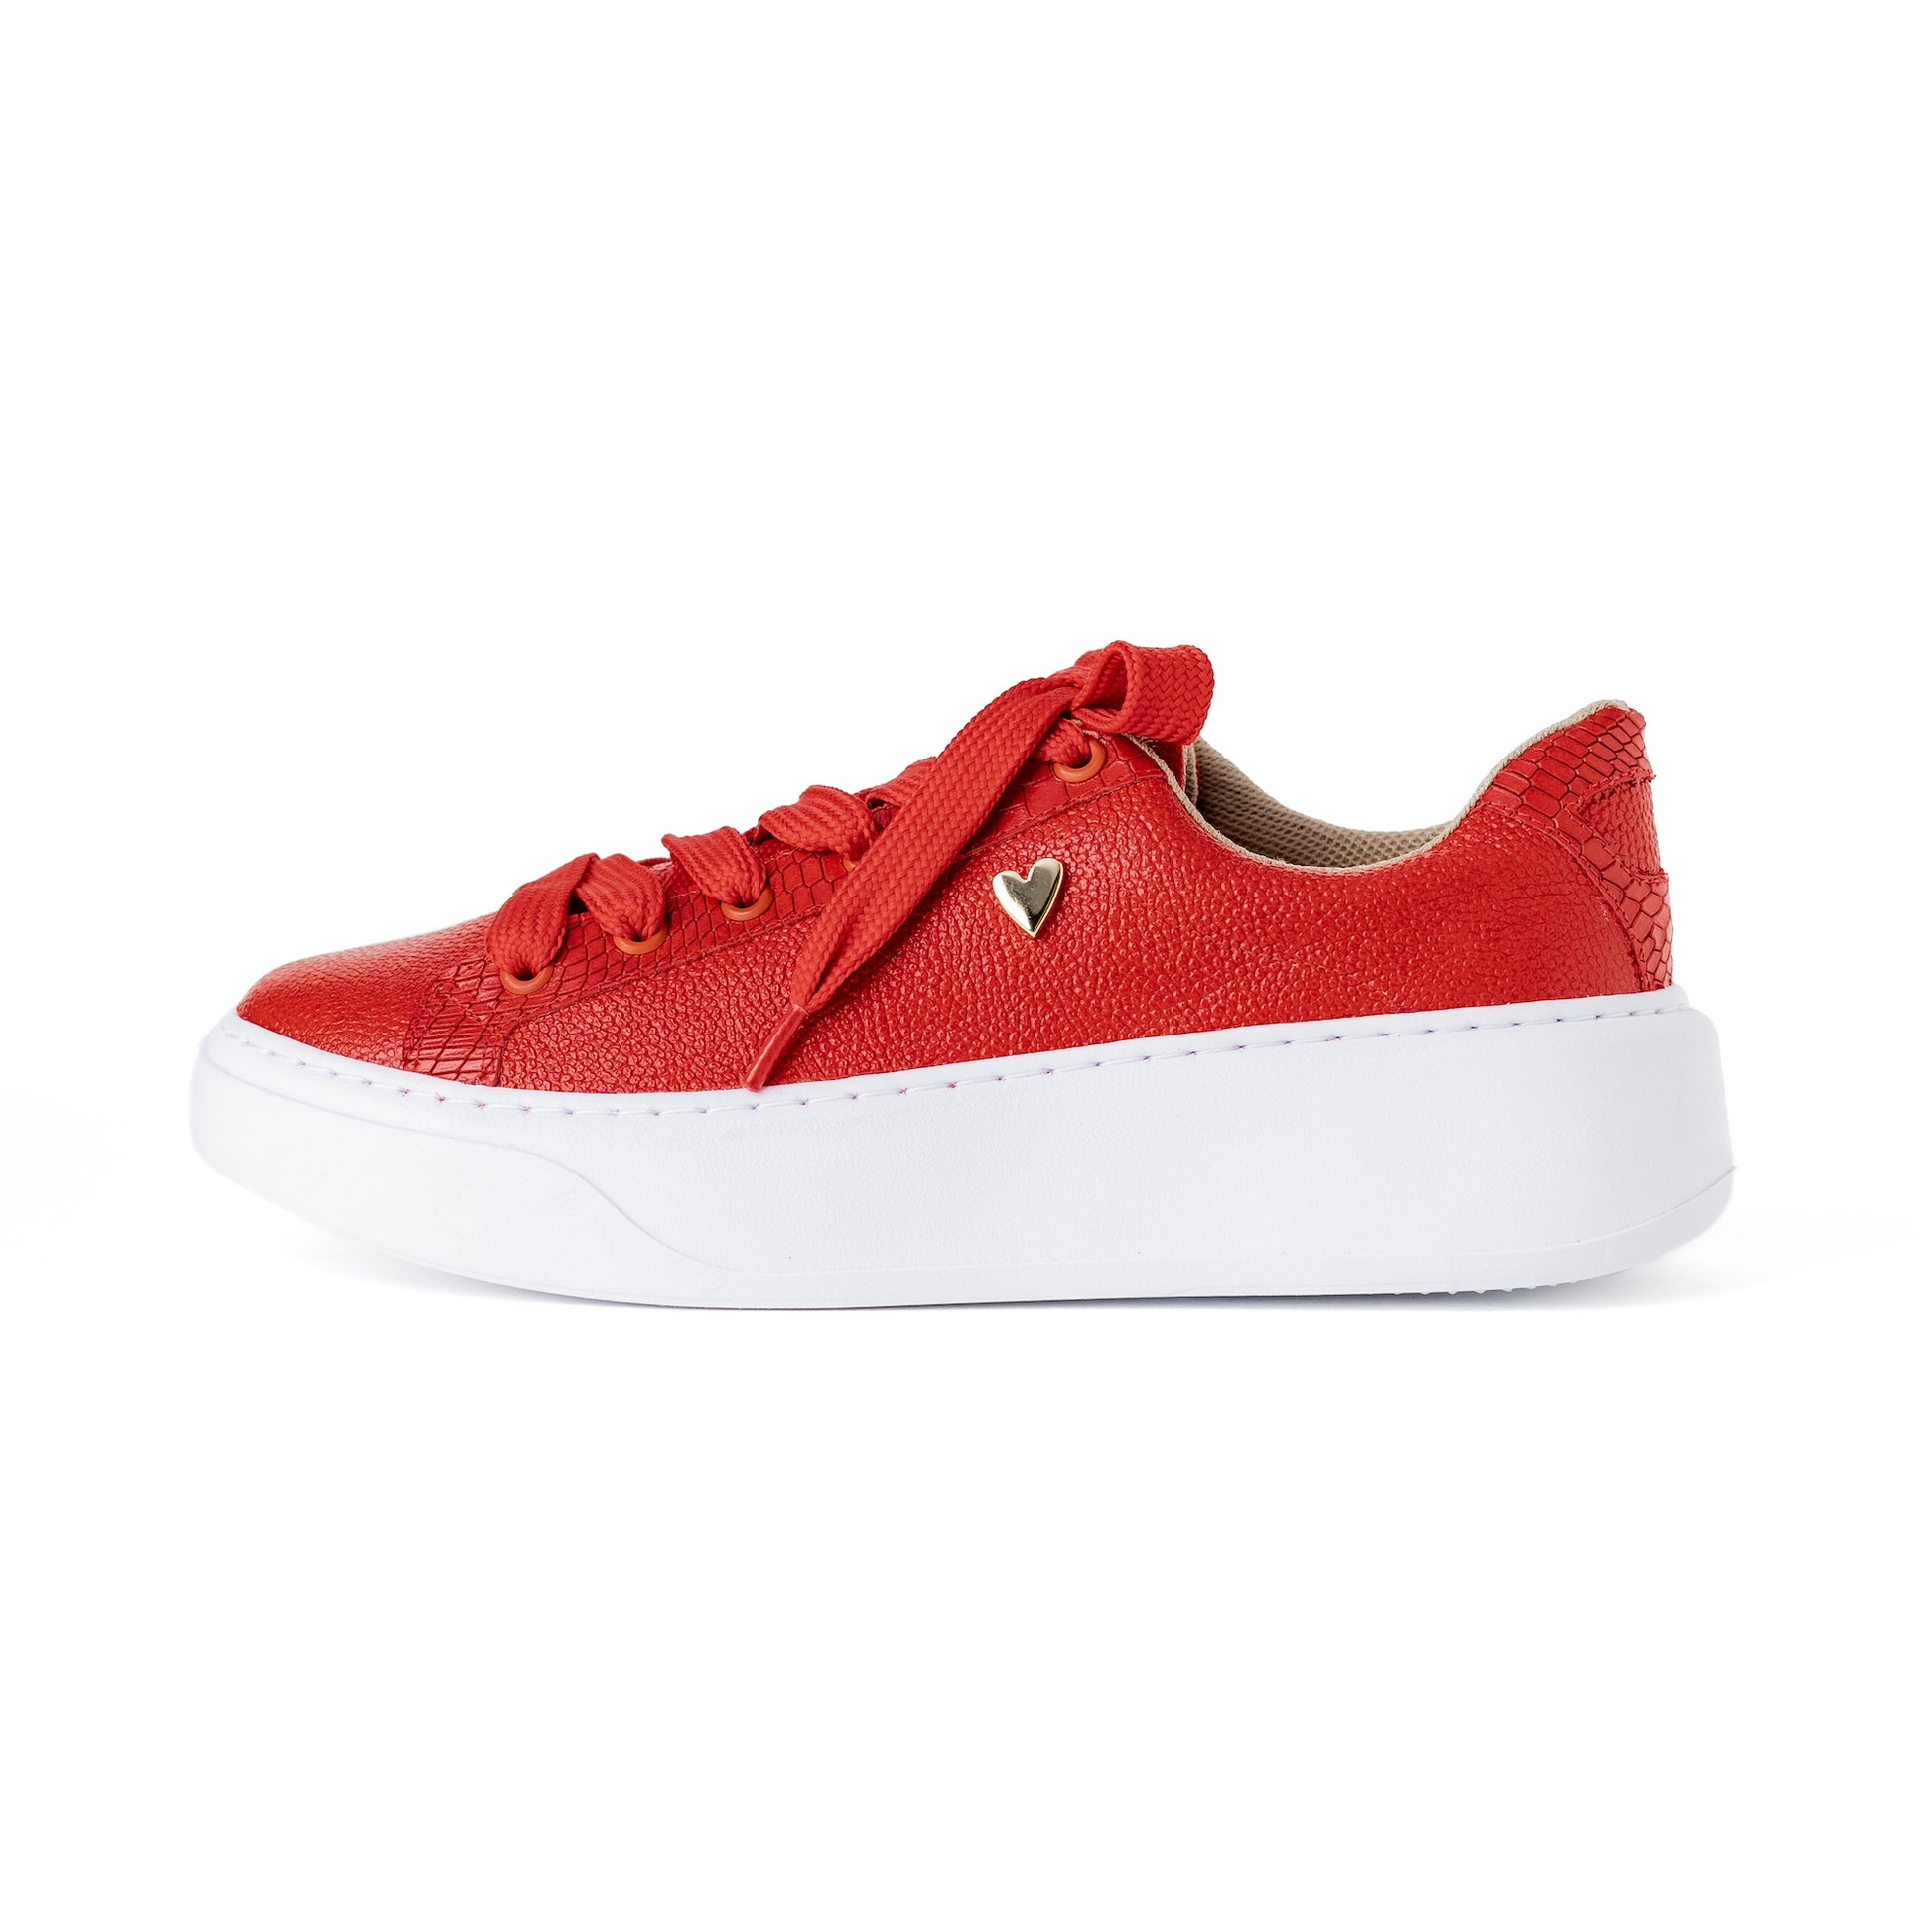 Our bestseller sneakers BRIANA is here with a fresh new style and a beautiful red color, she is ready to bring a pop of color to your outfits. FEATURES Genuine leather upper material Genuine leather insole lining Rubber platform lining American sizes Flexible rubber outsole Hand made 1.5 inch heel height 1 inch platform